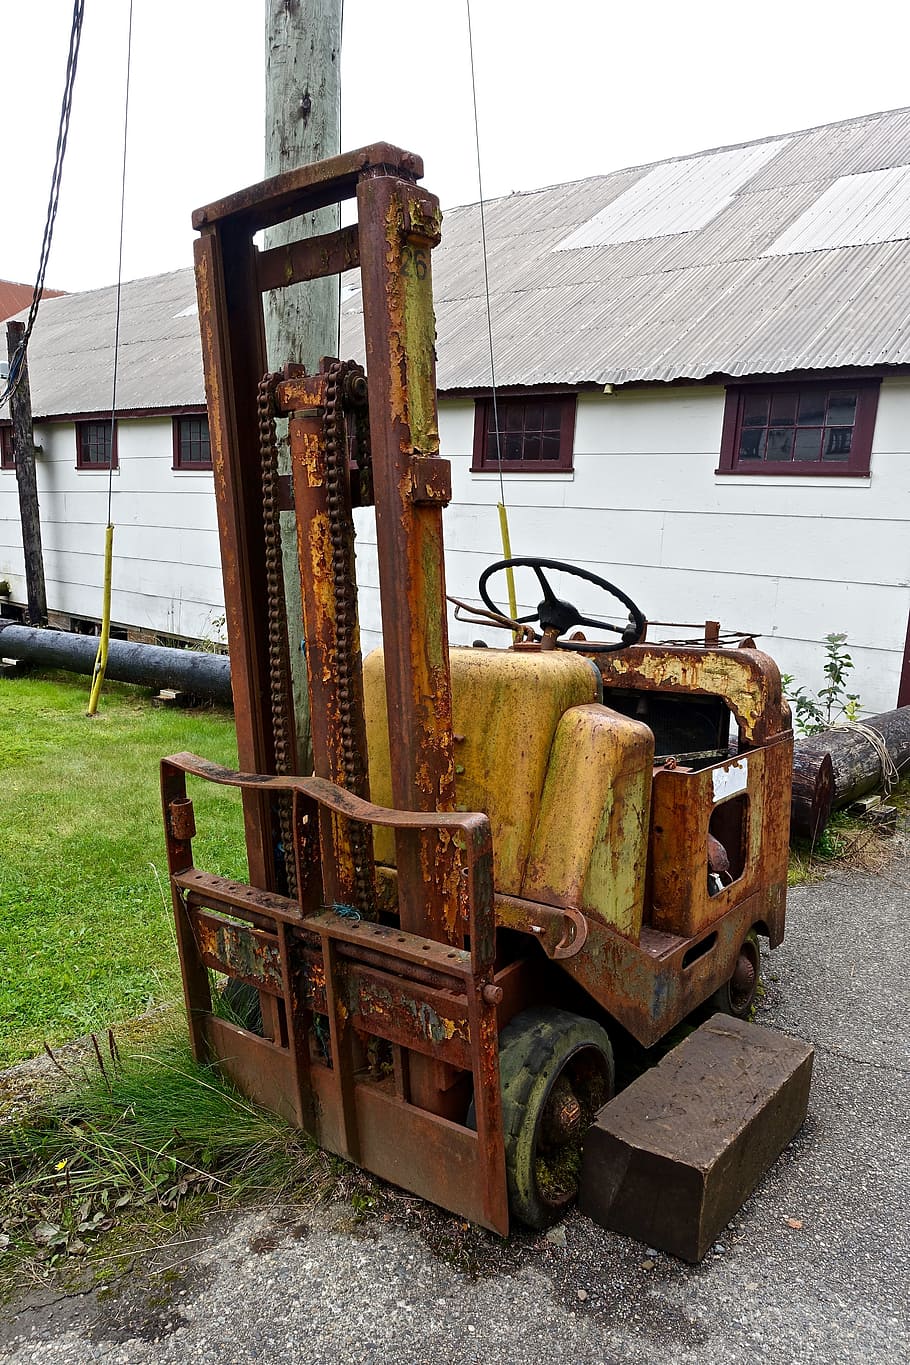 tractor, dilapidated, fork lift, machinery, corrosion, old, corroded, overhaul, rust, salvage